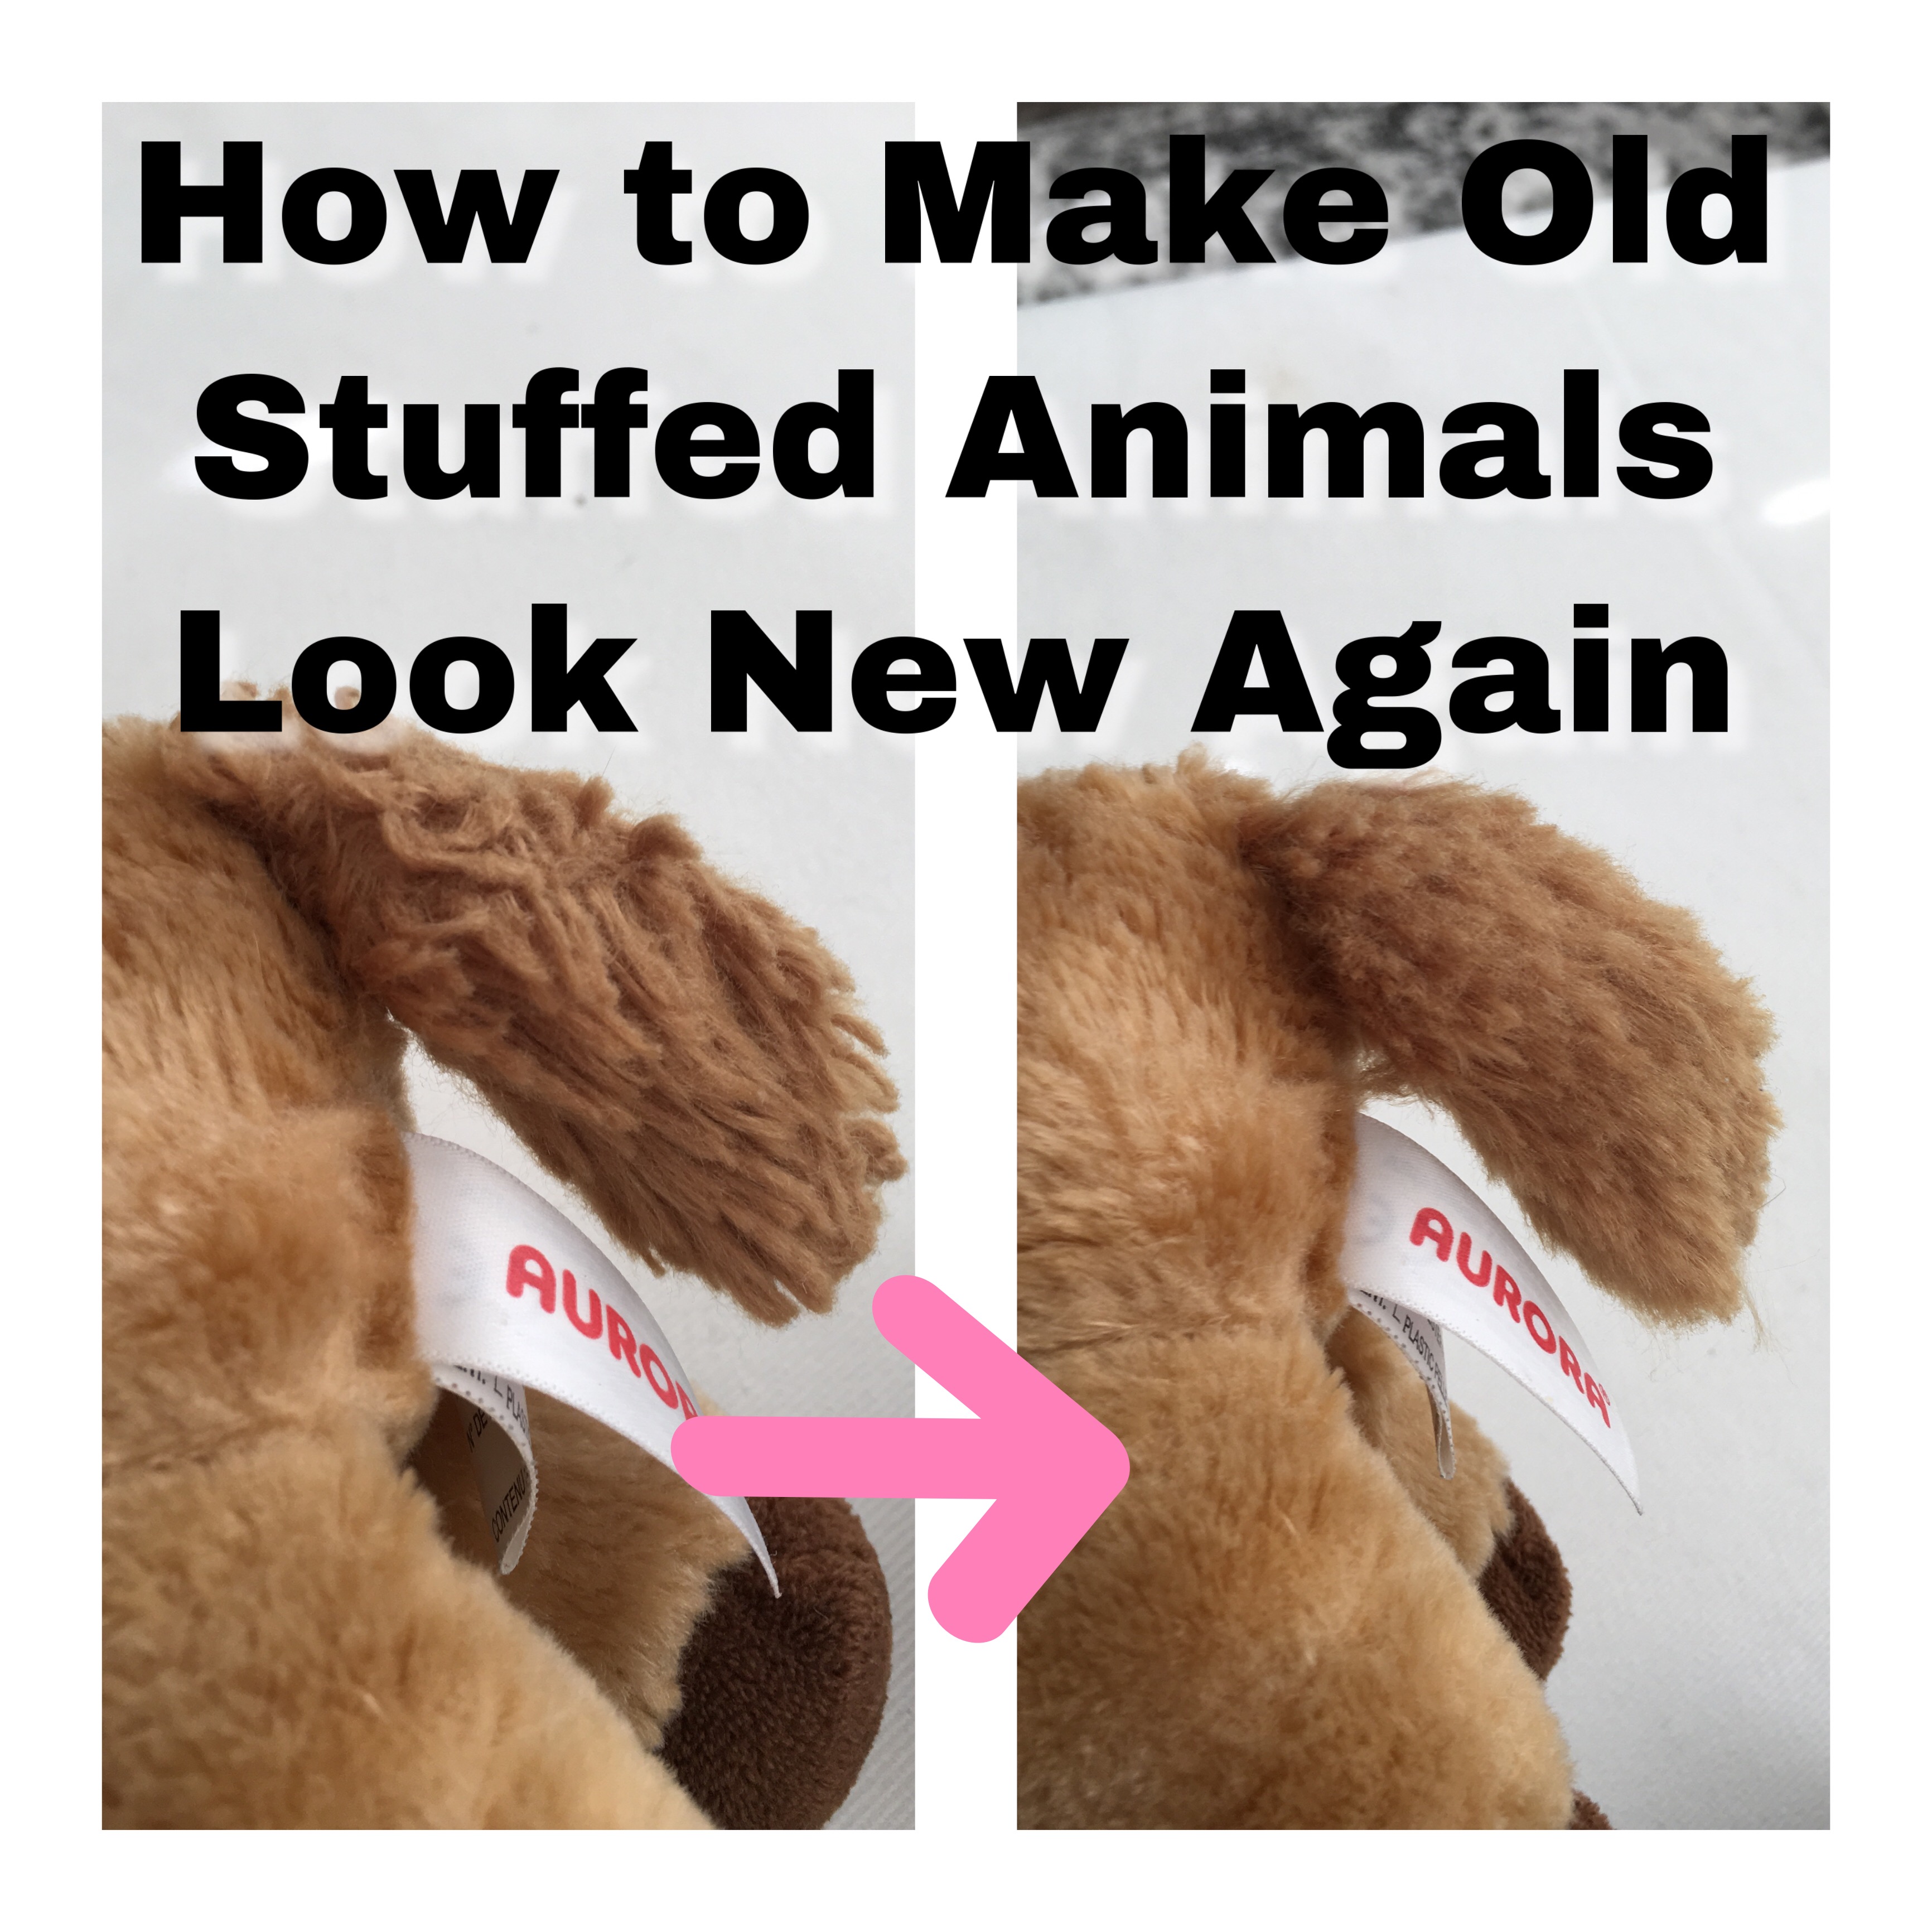 How to Make Old Stuffed Animals Look New Again